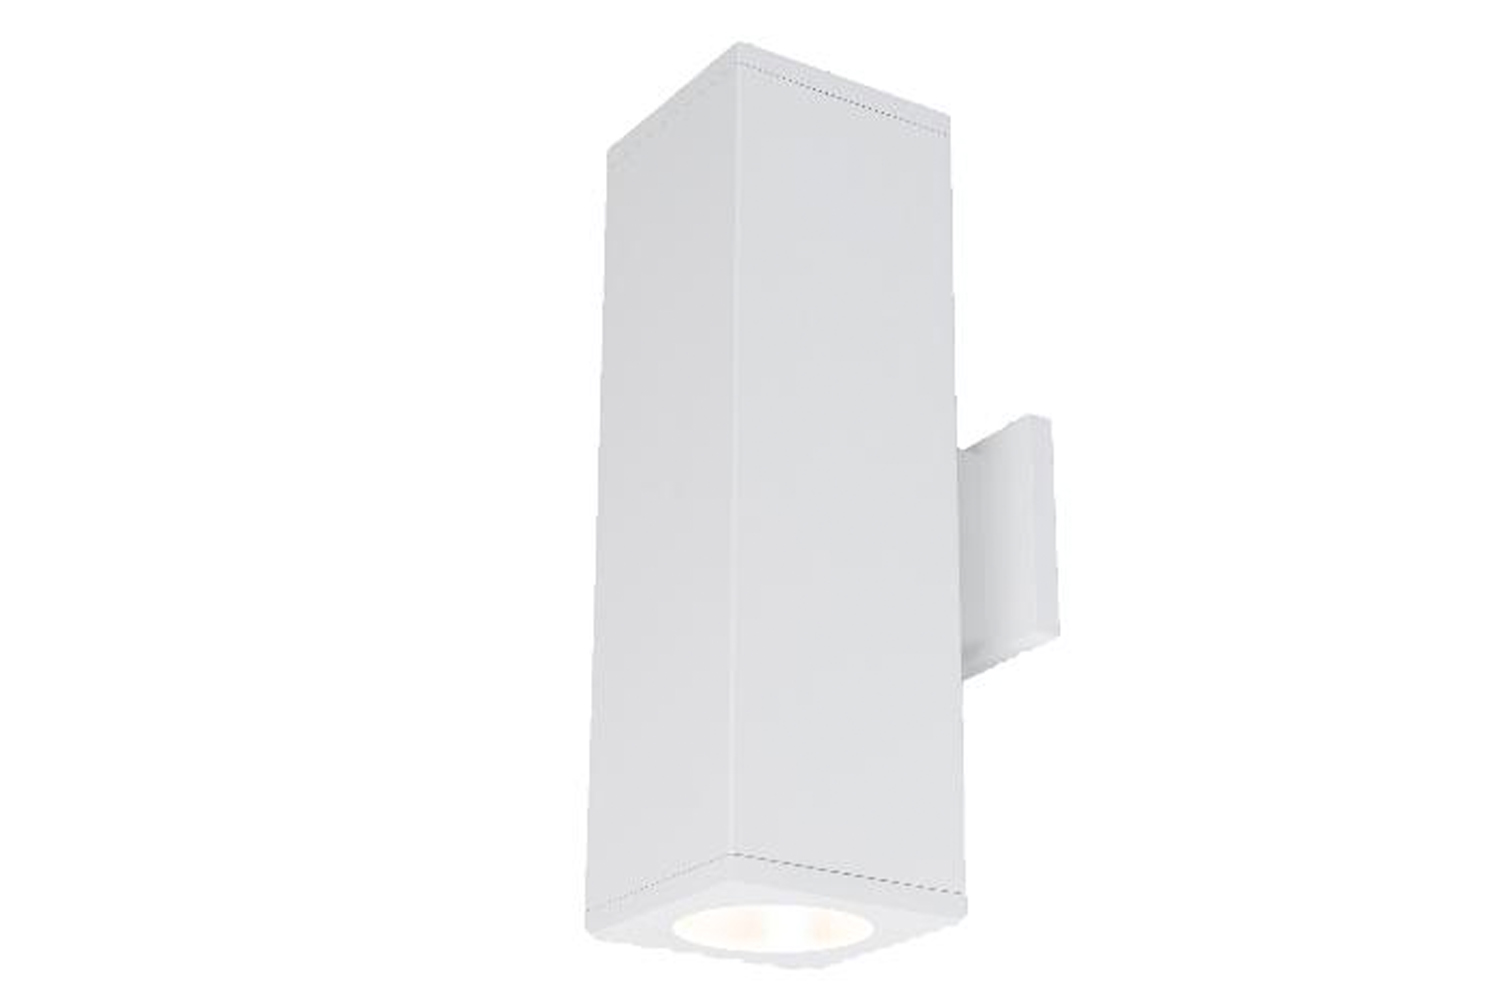 Introducing the new Cube ceiling and wall LED luminaire from WAC Lighting